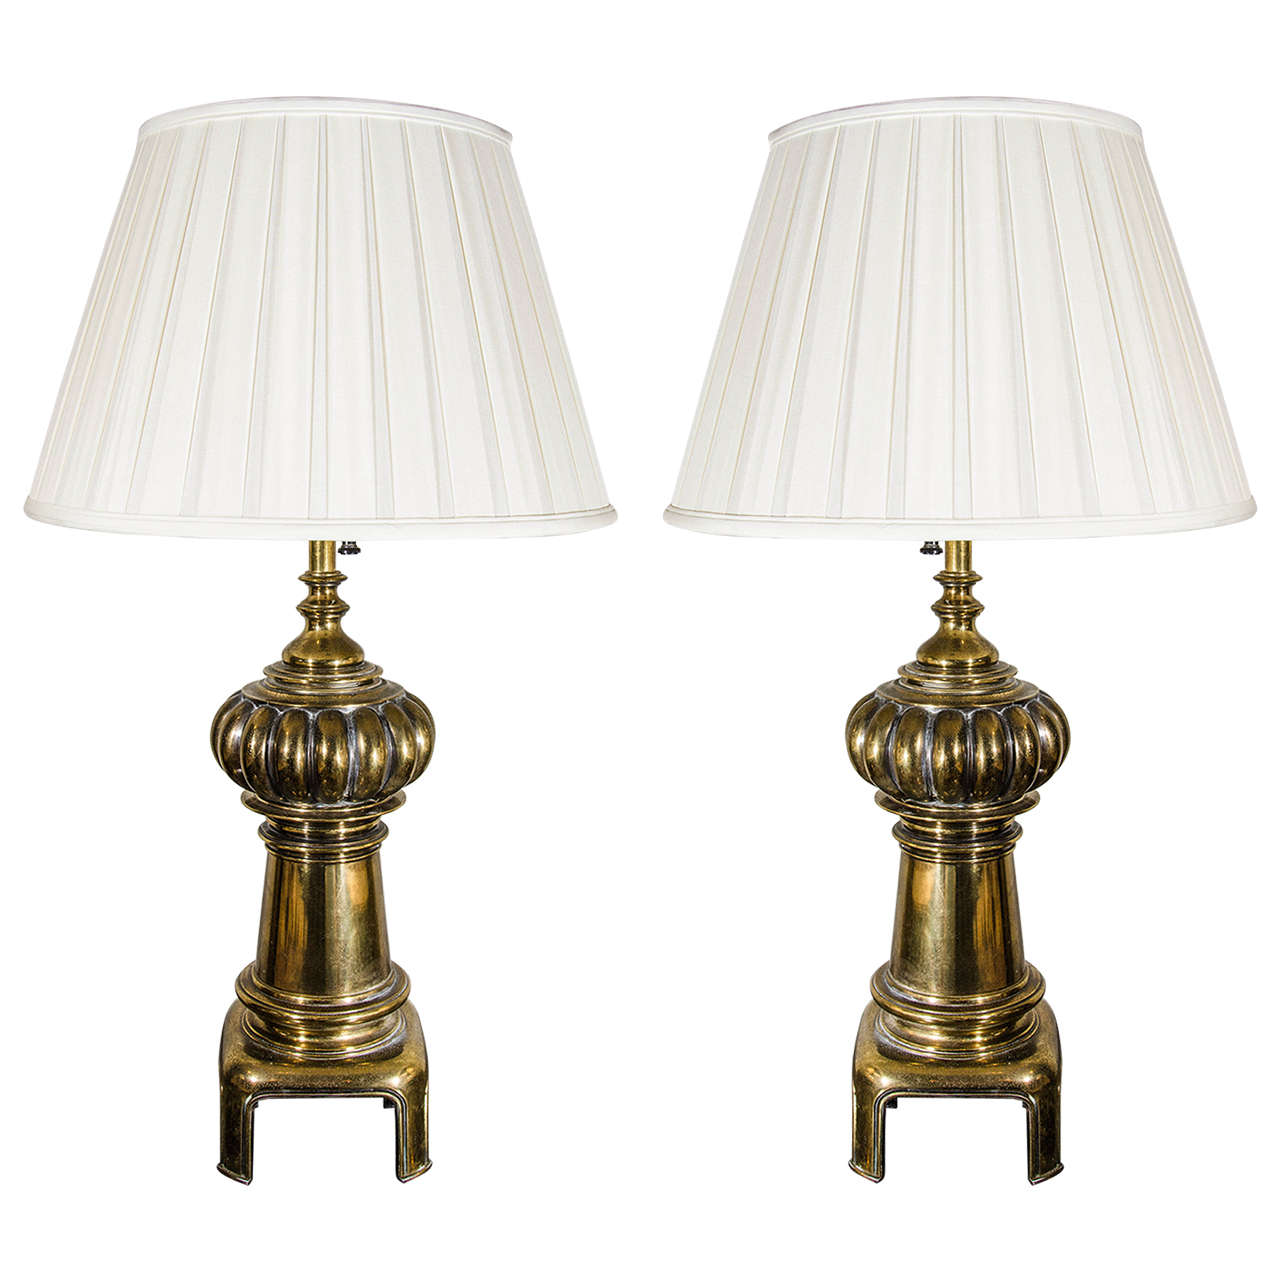 Pair of Moroccan Inspired Brass Lamps For Sale